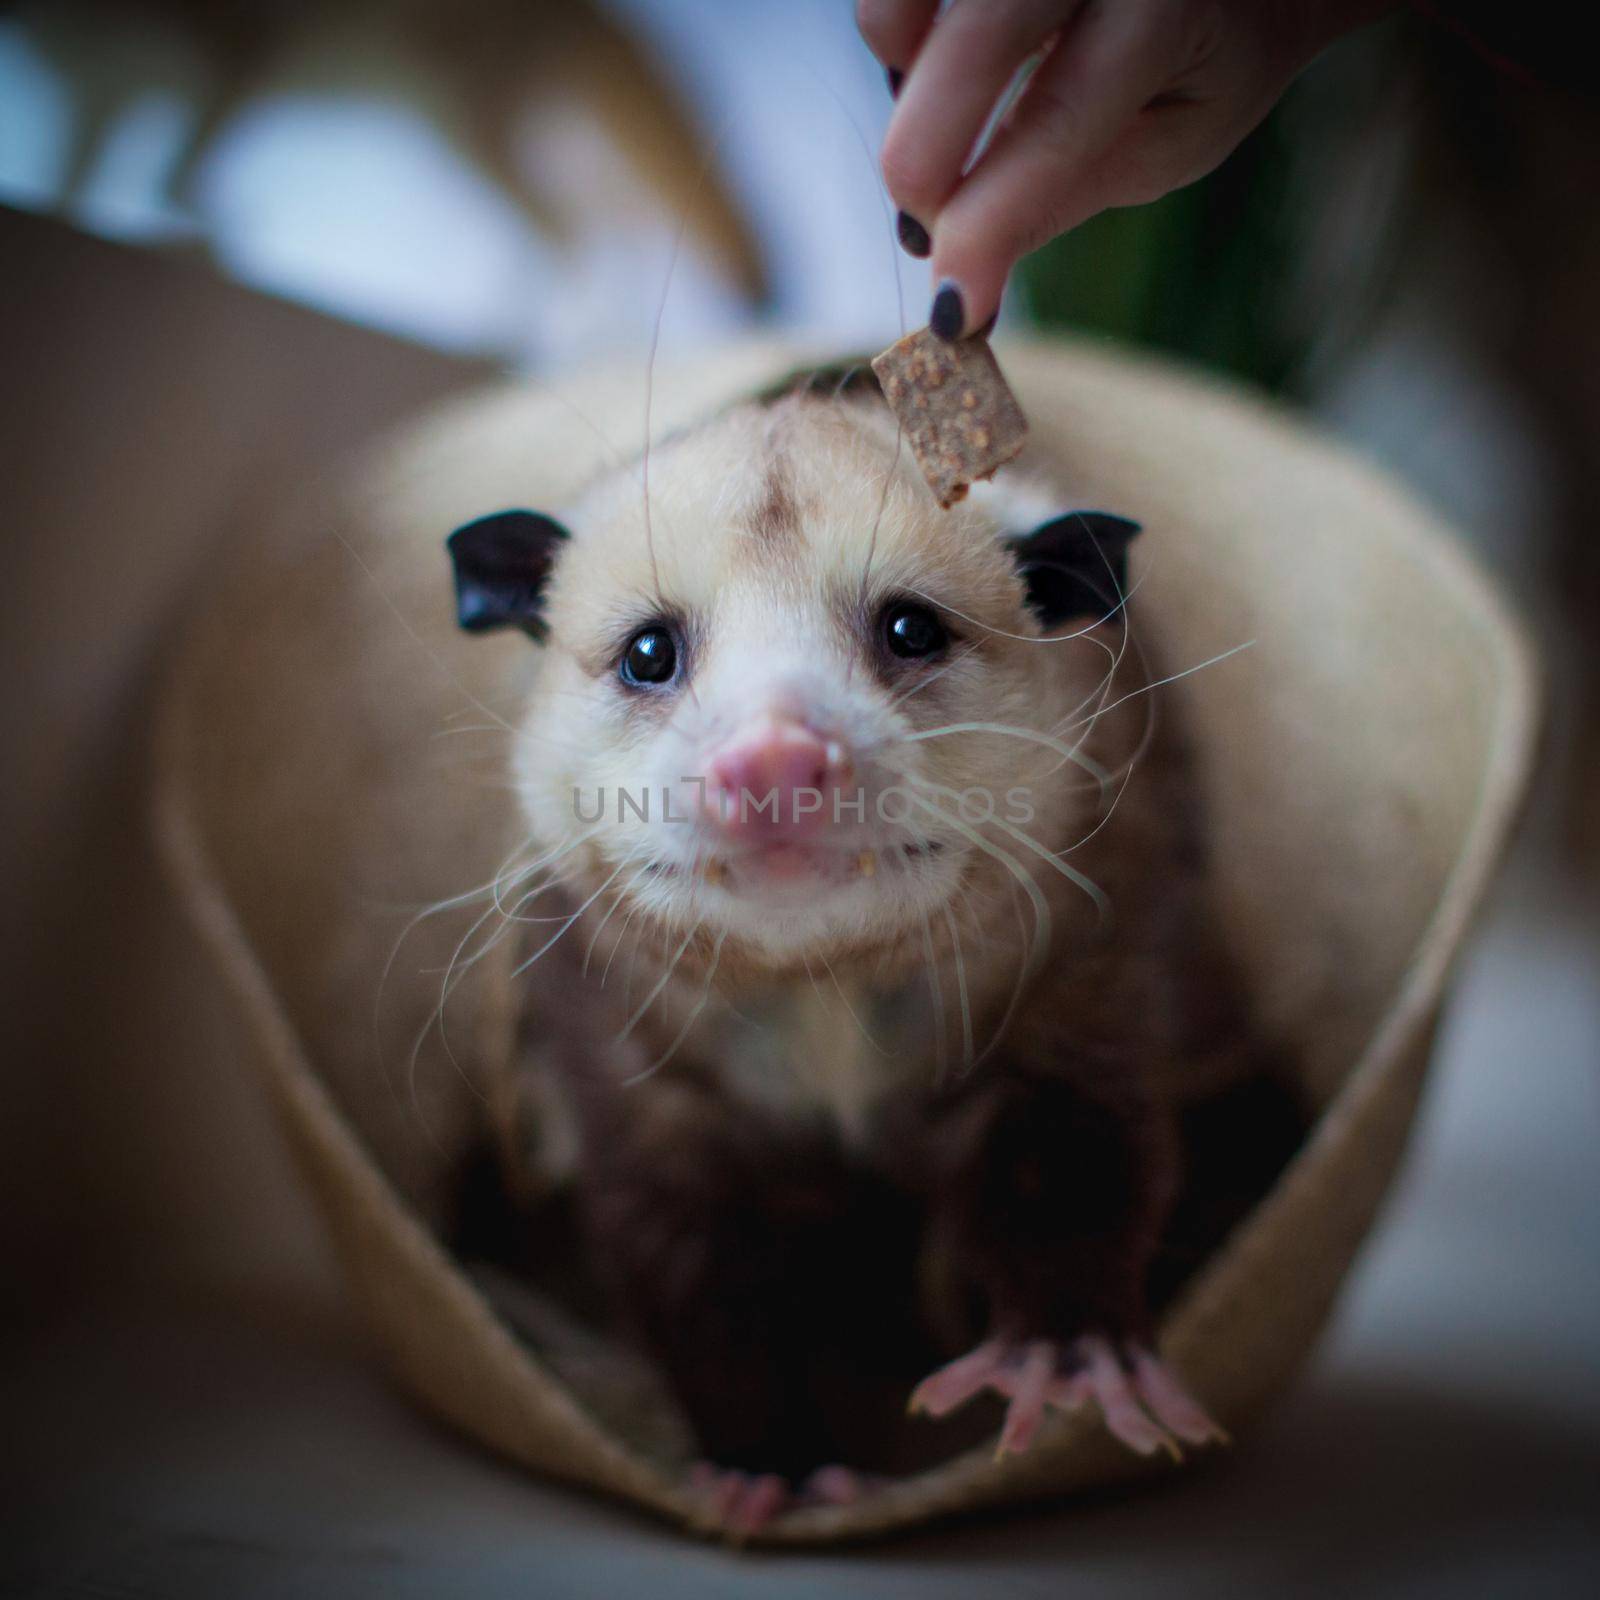 The Virginia or North American opossum, Didelphis virginiana, in a basket